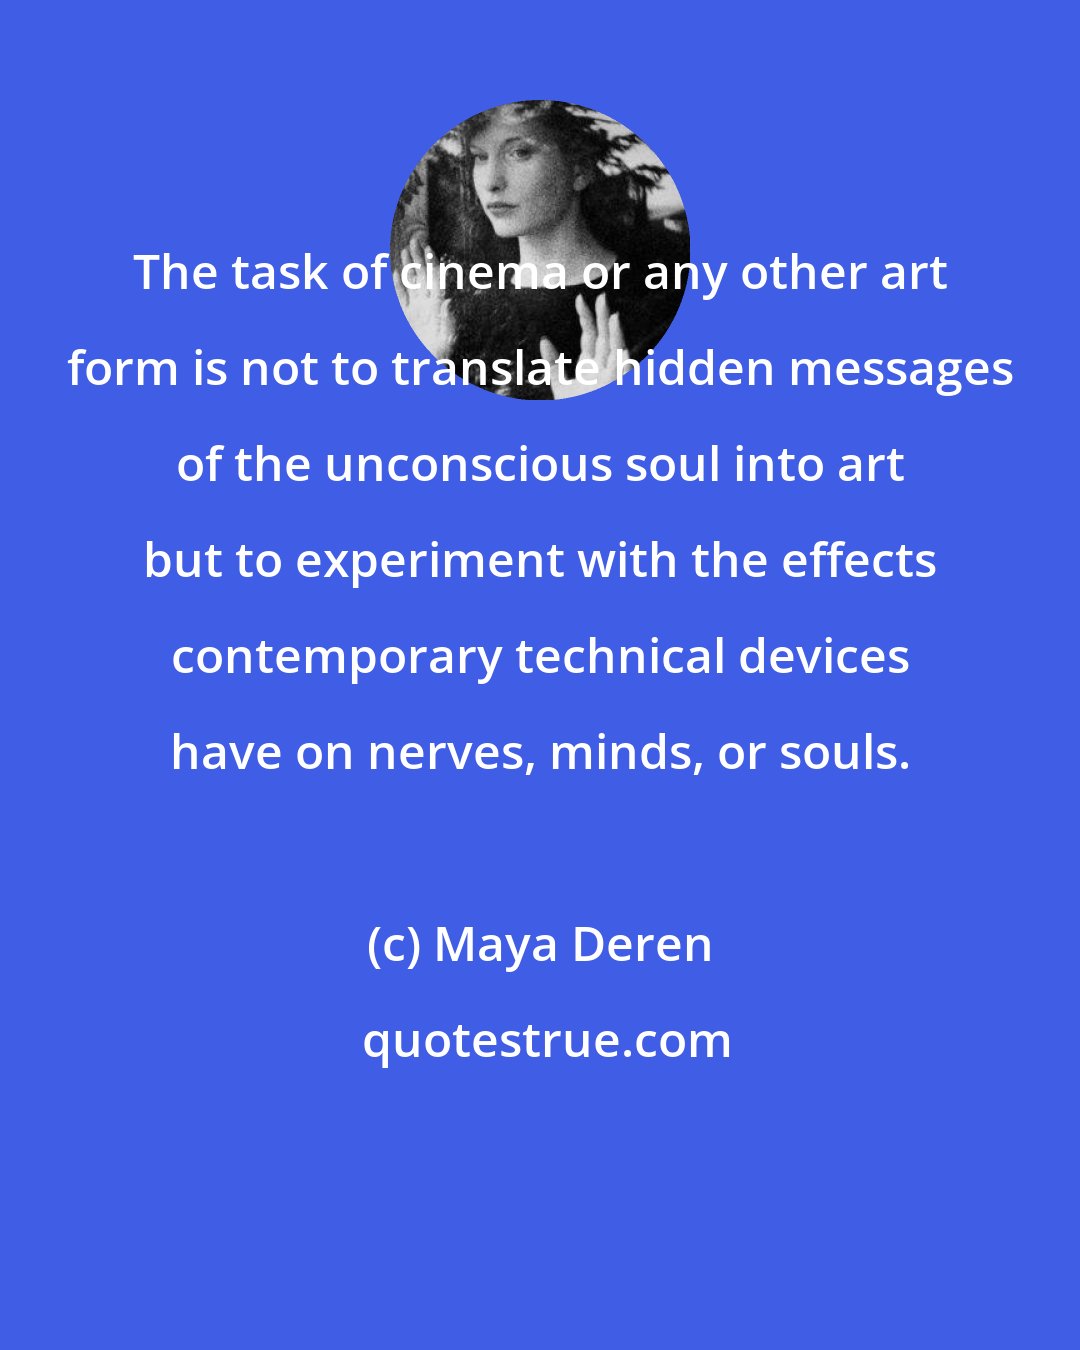 Maya Deren: The task of cinema or any other art form is not to translate hidden messages of the unconscious soul into art but to experiment with the effects contemporary technical devices have on nerves, minds, or souls.